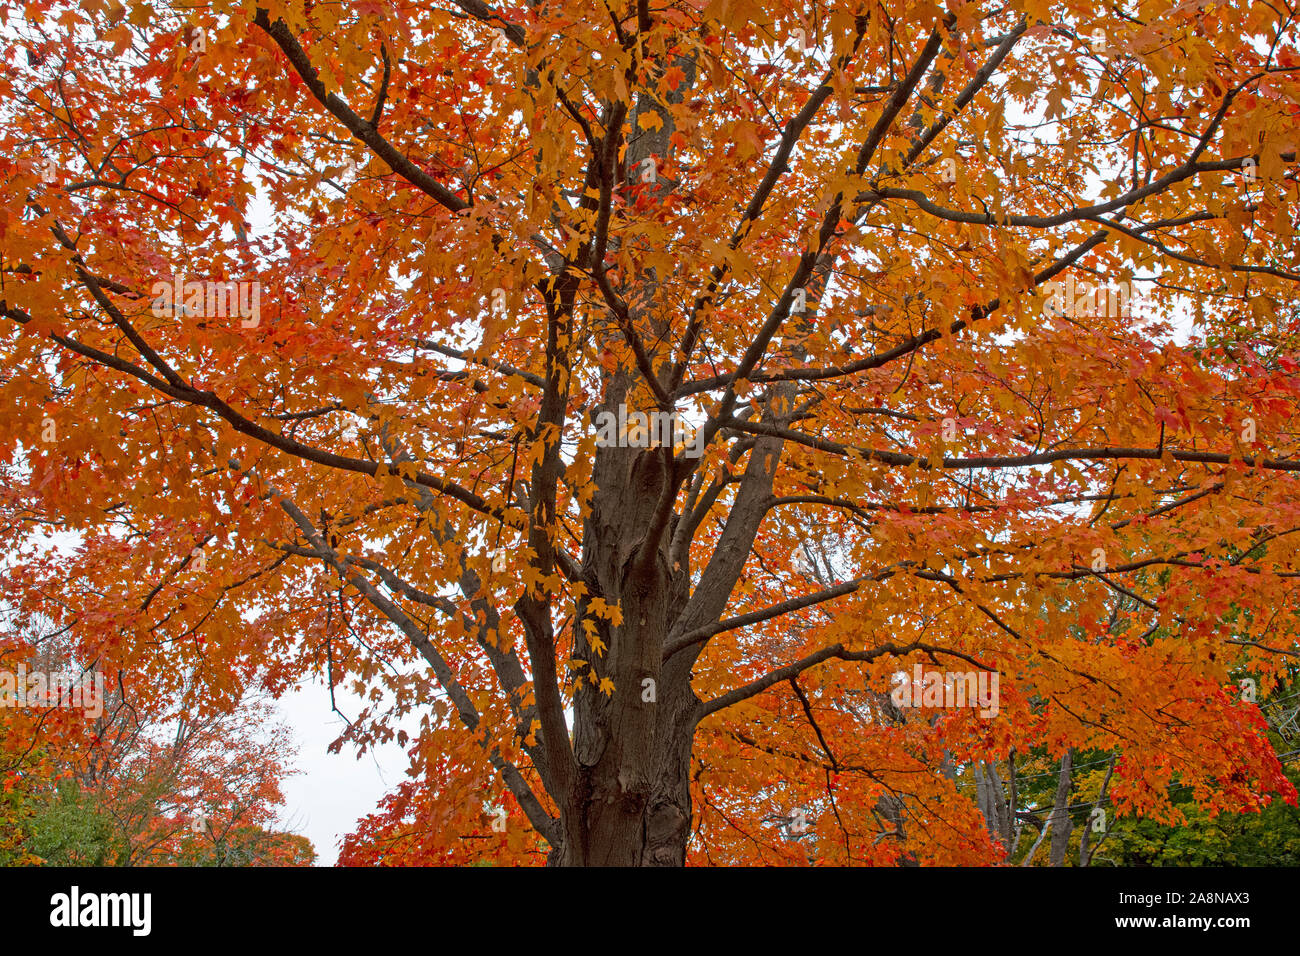 Colorful autumn leaves and flowers are beautiful in the cooler weather. Stock Photo